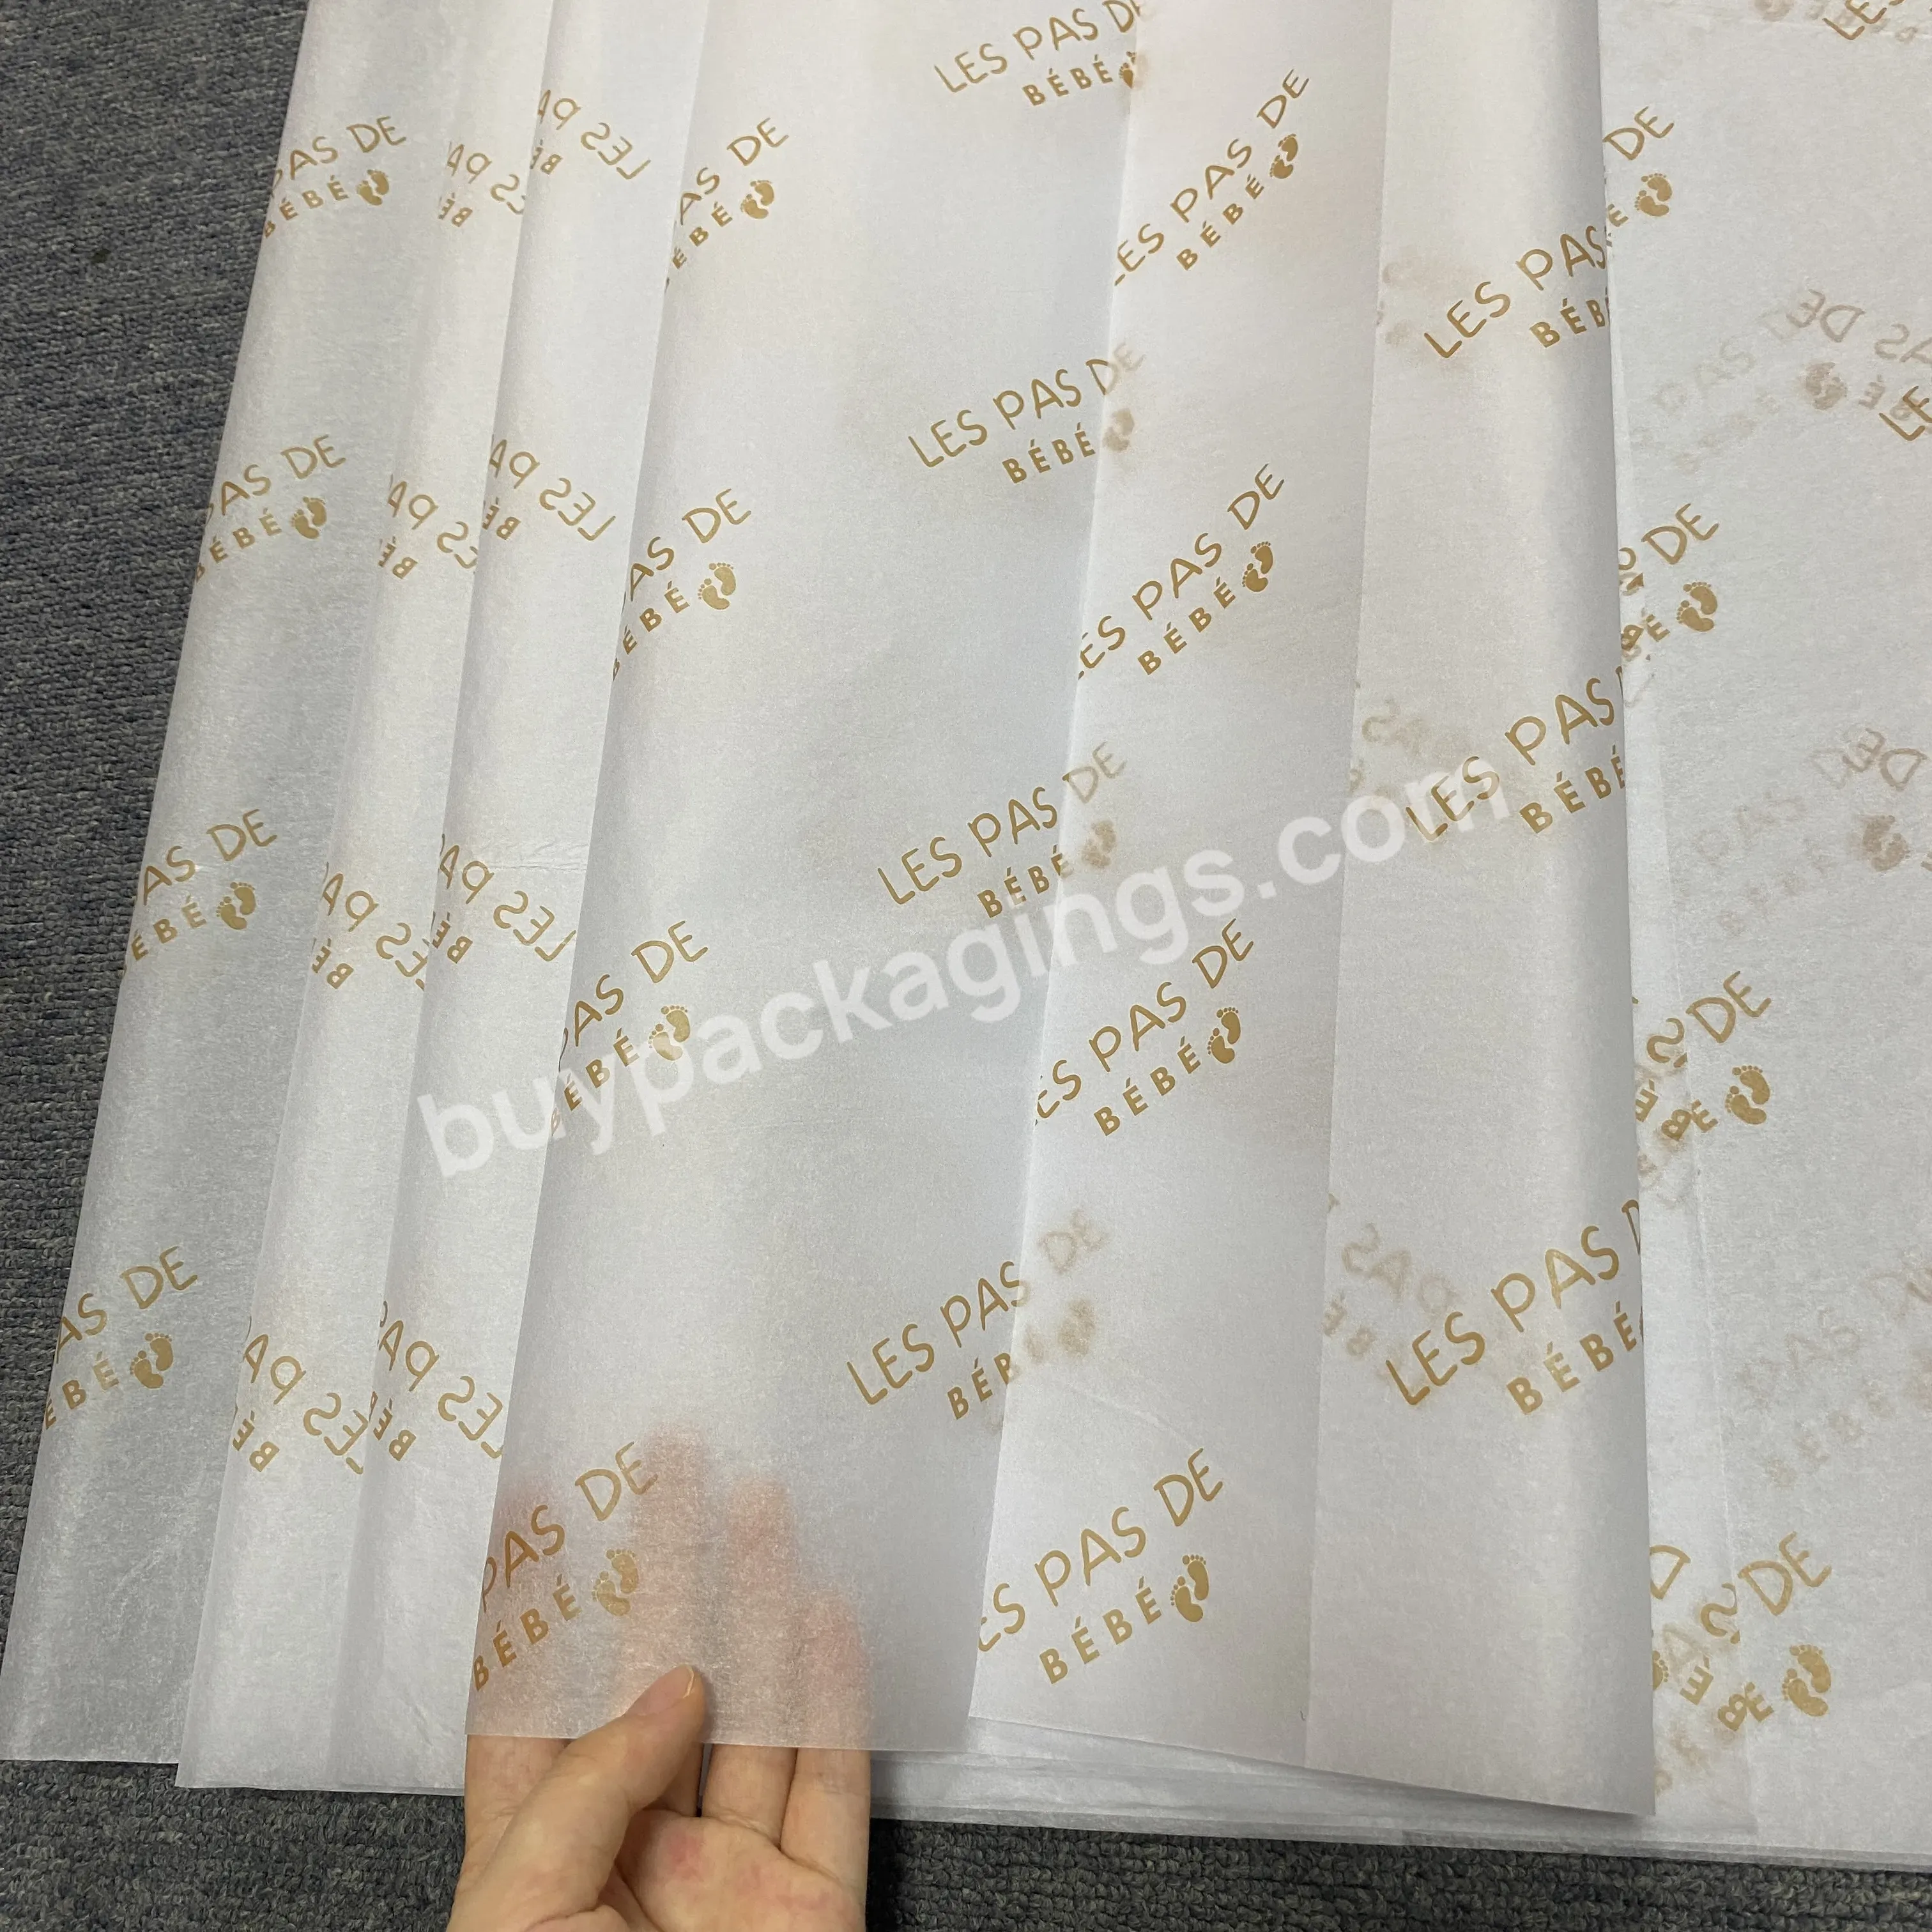 17g Custom Printed Tissue Paper Logo For Clothes Shoes Food Packaging - Buy Wrapping Flowers And Clothing,Custom Key Cover With Your Own Logo,Customized Logo And Size.